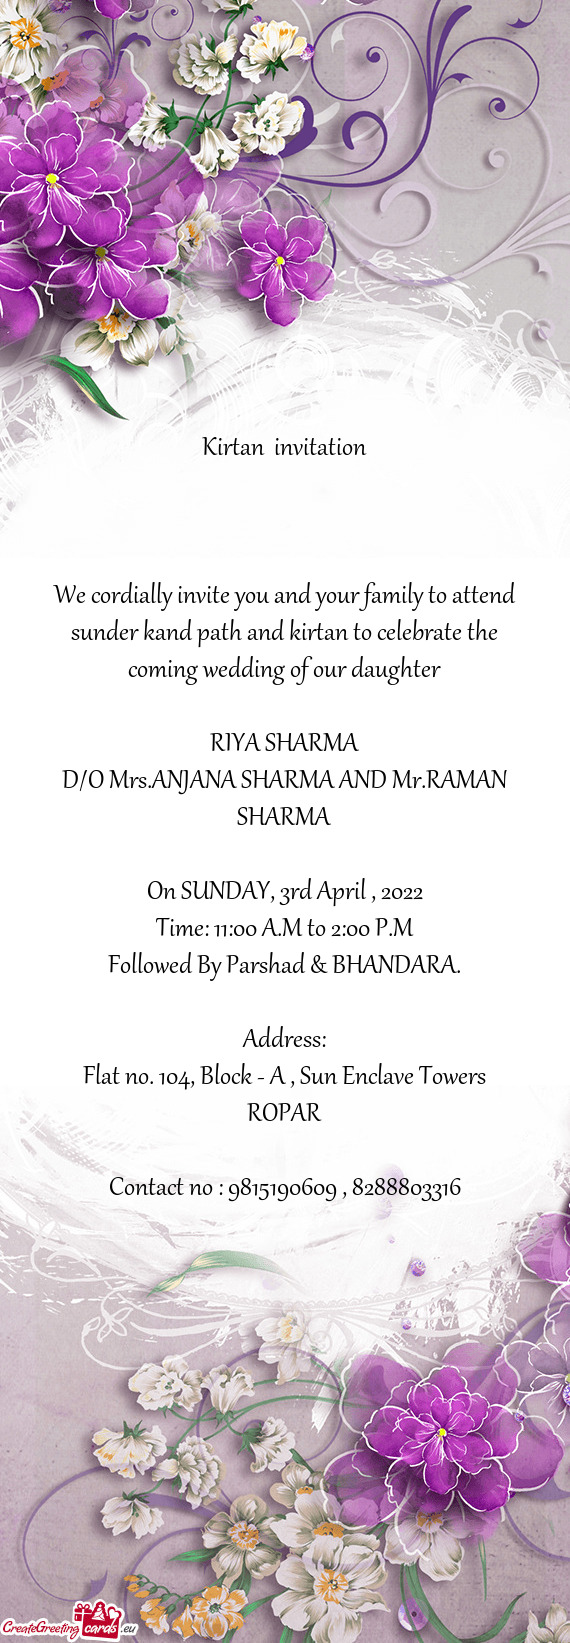 We cordially invite you and your family to attend sunder kand path and kirtan to celebrate the comin